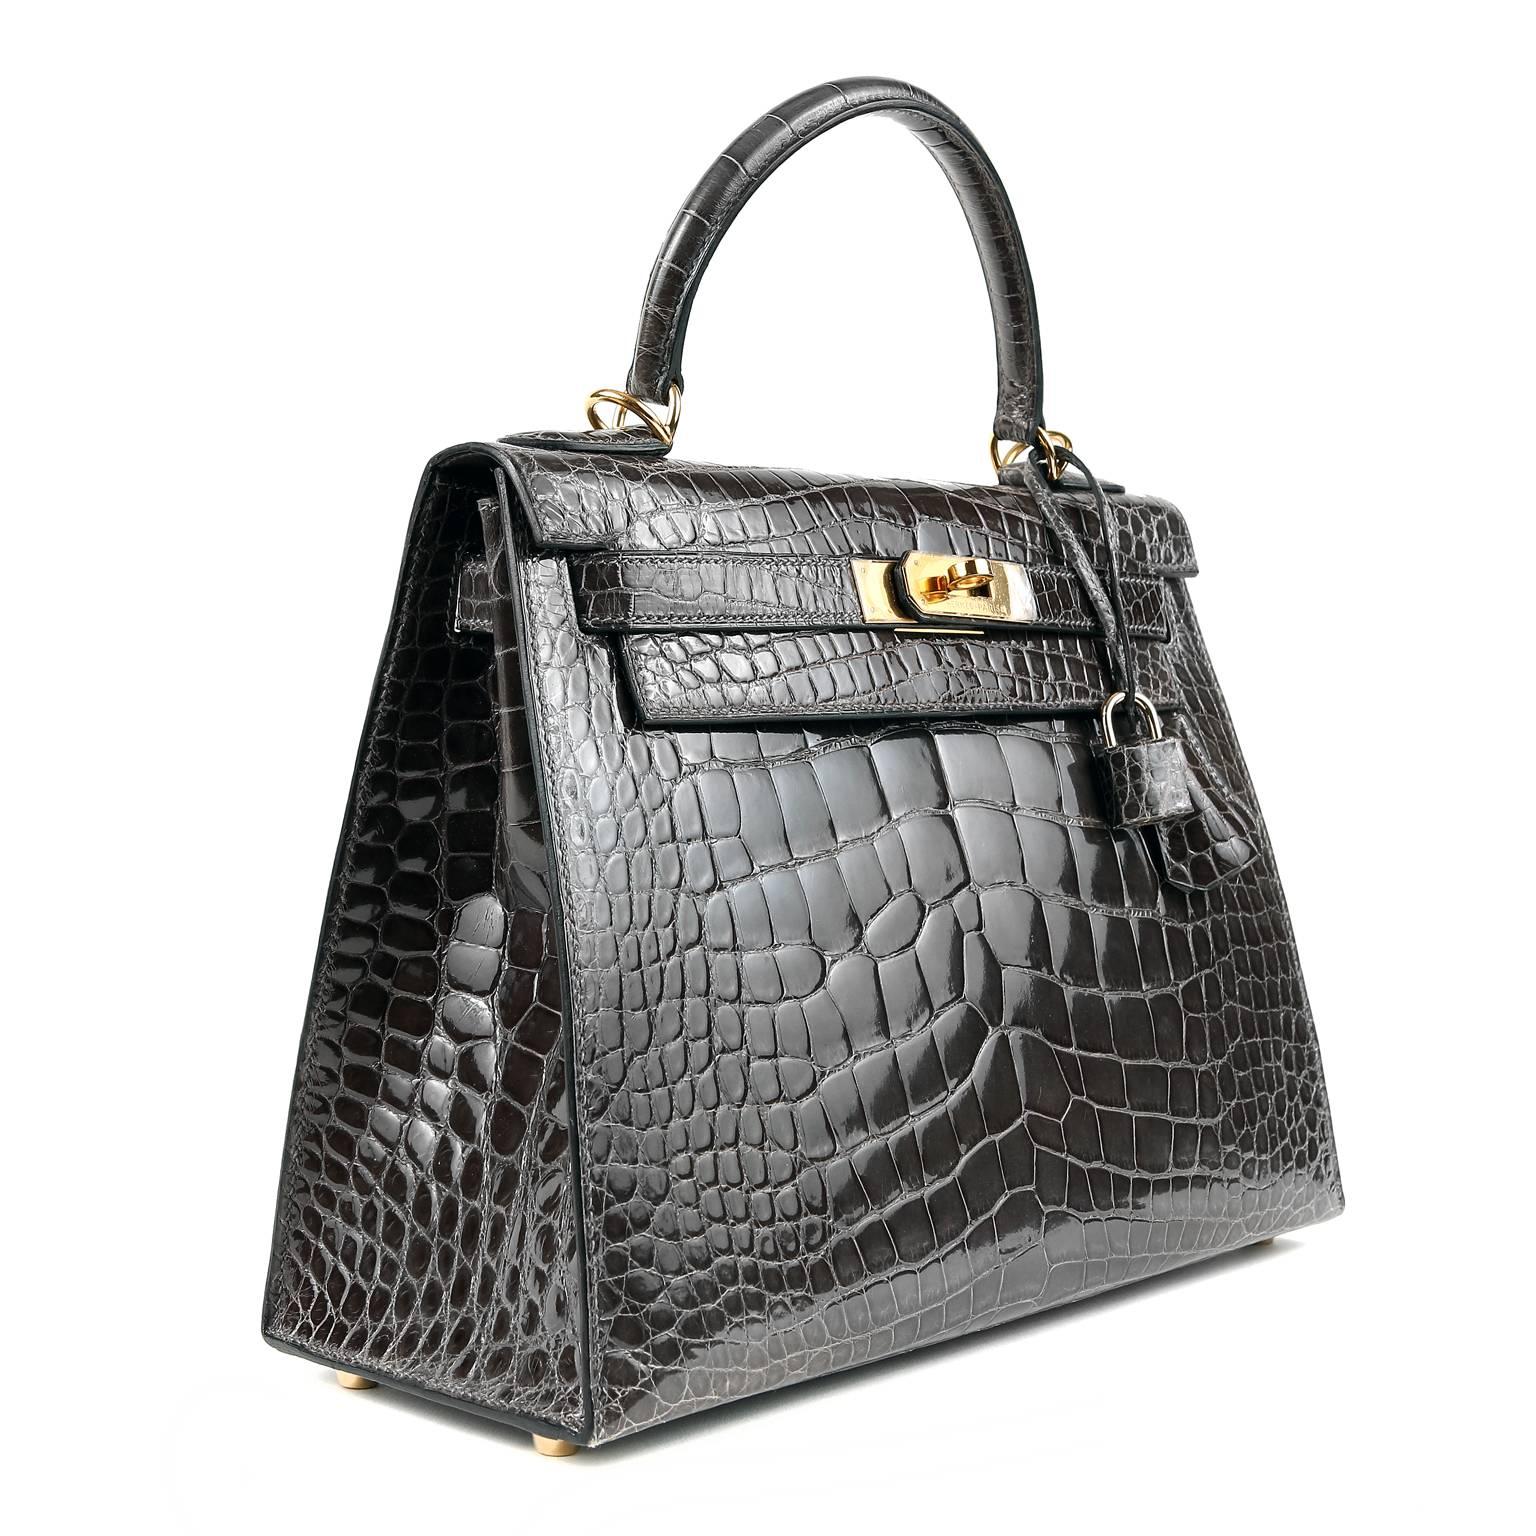 Hermès Graphite Alligator 28 cm Kelly Bag- Nearly Pristine   
Hermès bags are considered the ultimate luxury item the world over.  Hand stitched by skilled craftsmen, wait lists of a year or more are commonplace for the leather versions.  The